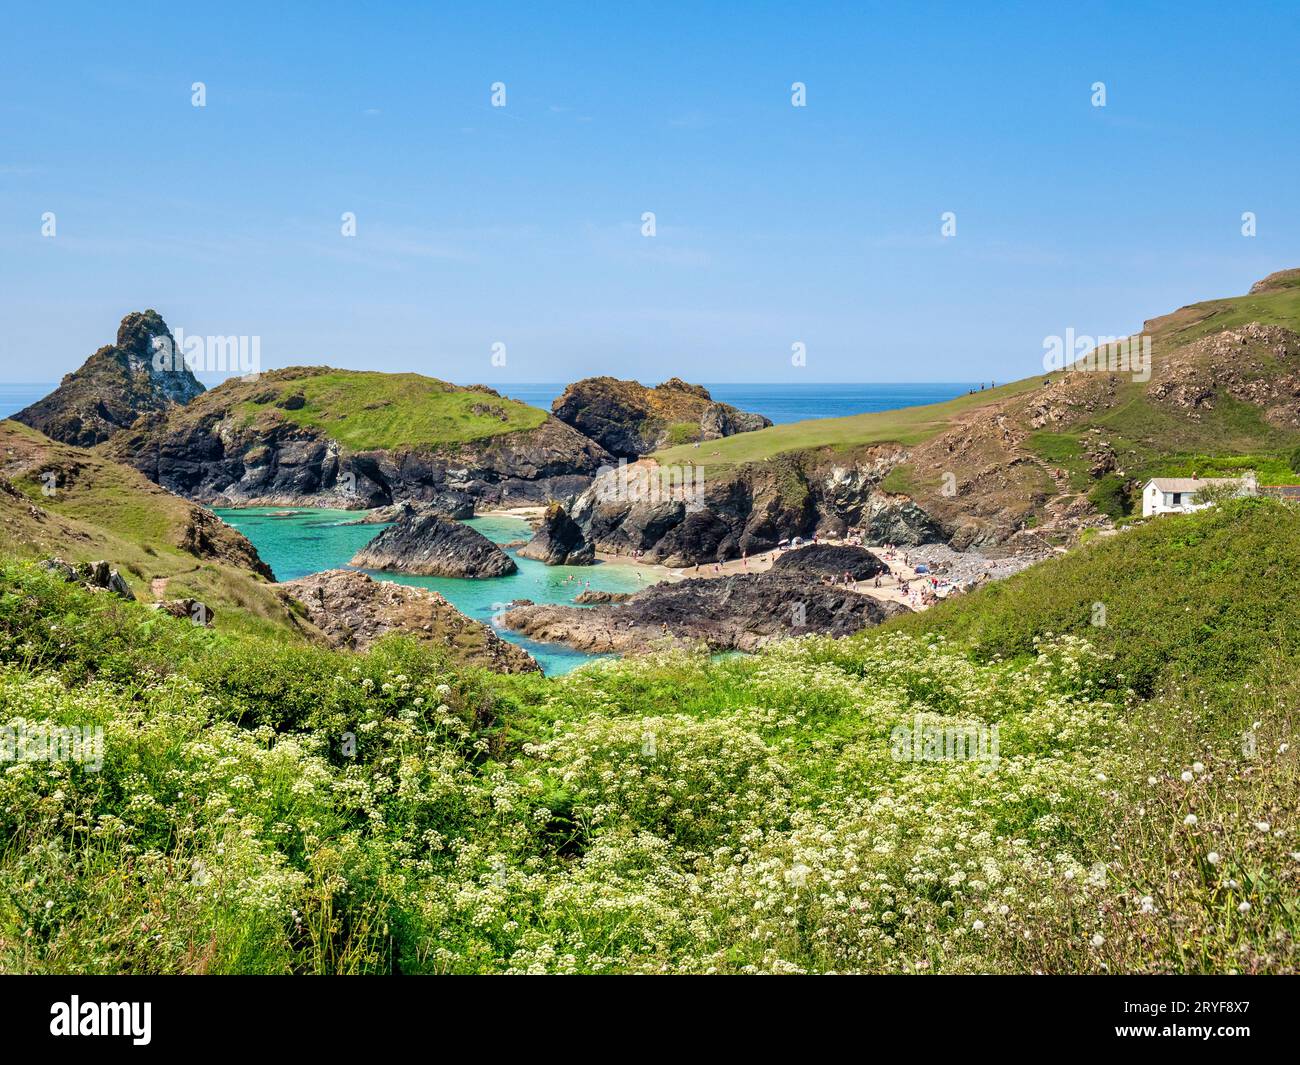 Kynance Cove, Cornwall, UK, said to be one of the most beautiful in the world, with people on the beach and a foreground of wildflowers. Stock Photo